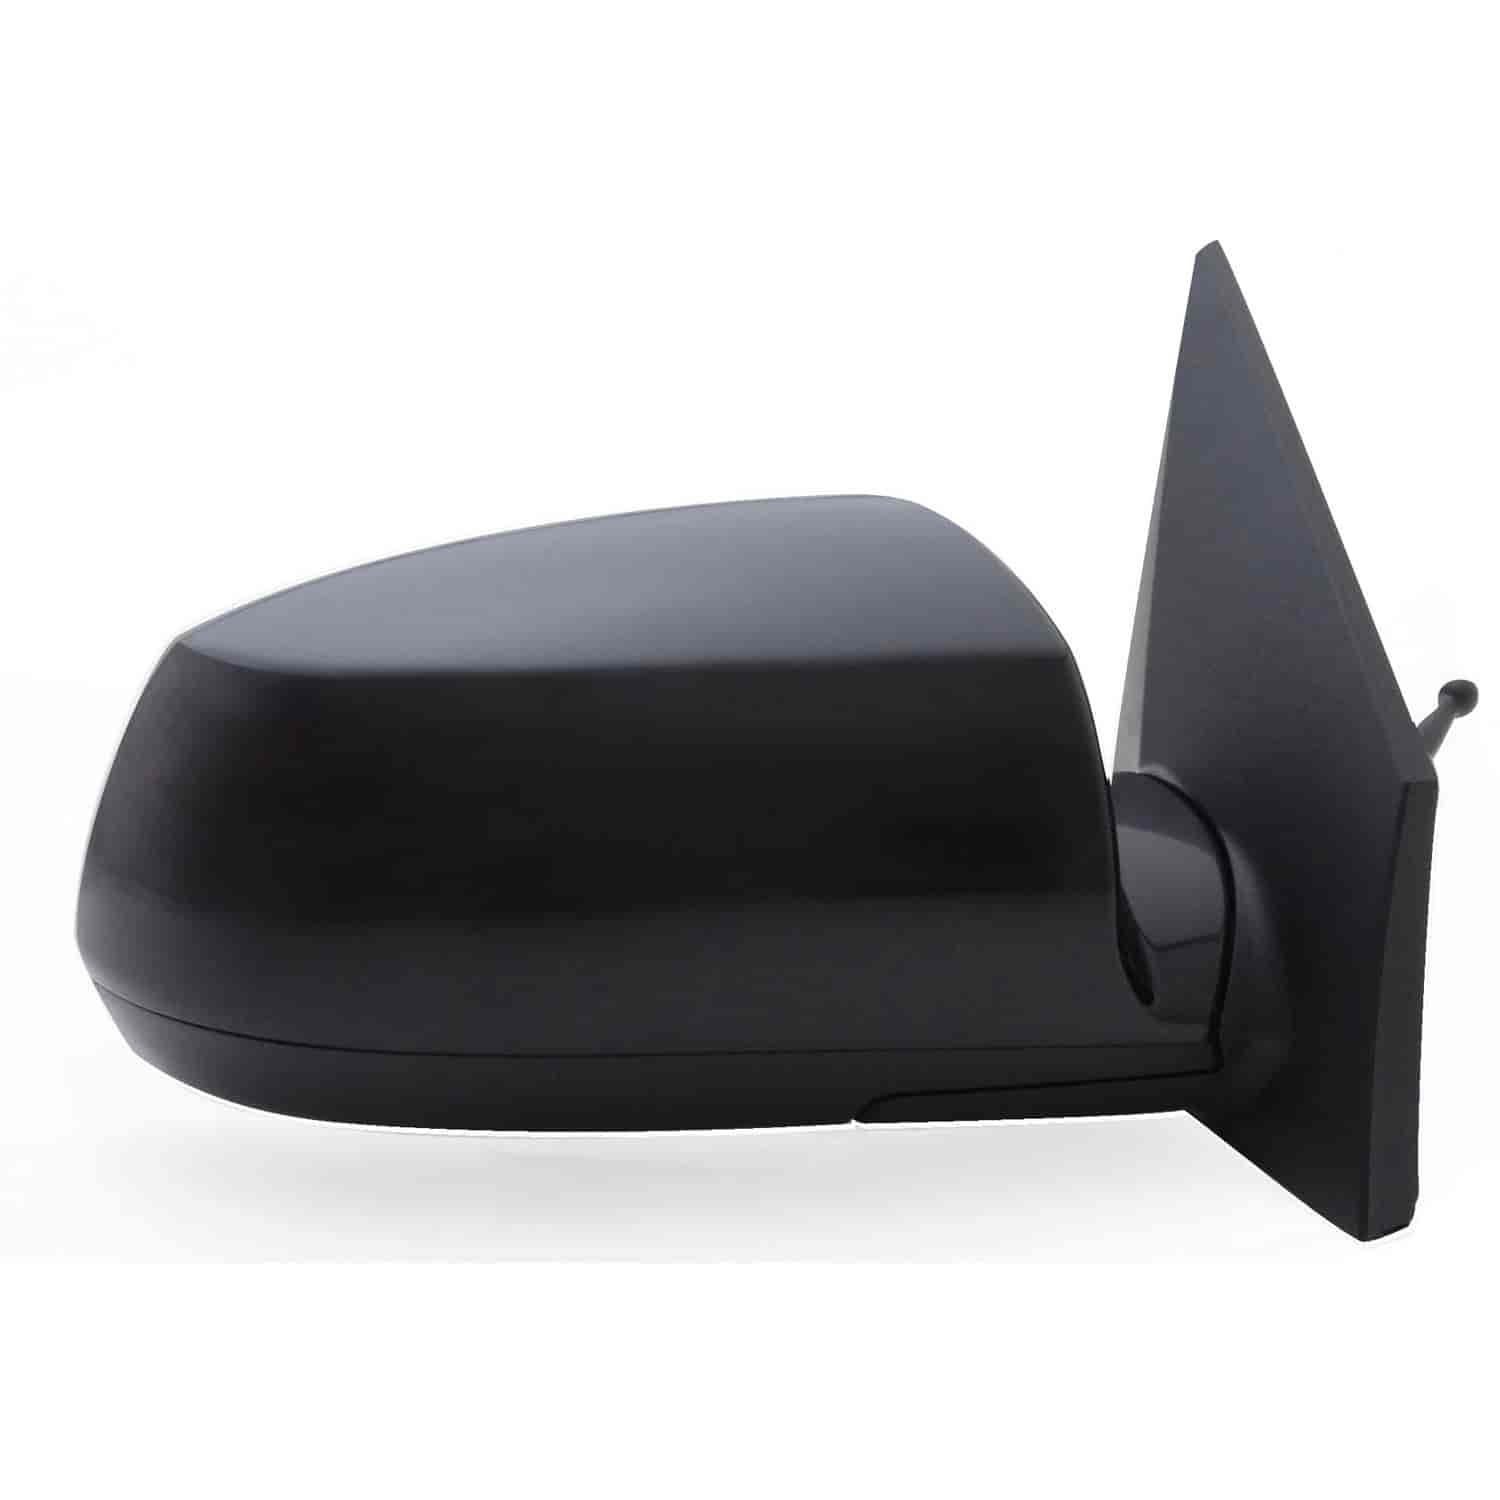 OEM Style Replacement mirror for 06-09 Kia Rio 5/ Rio Sedan lens passenger side mirror tested to fit